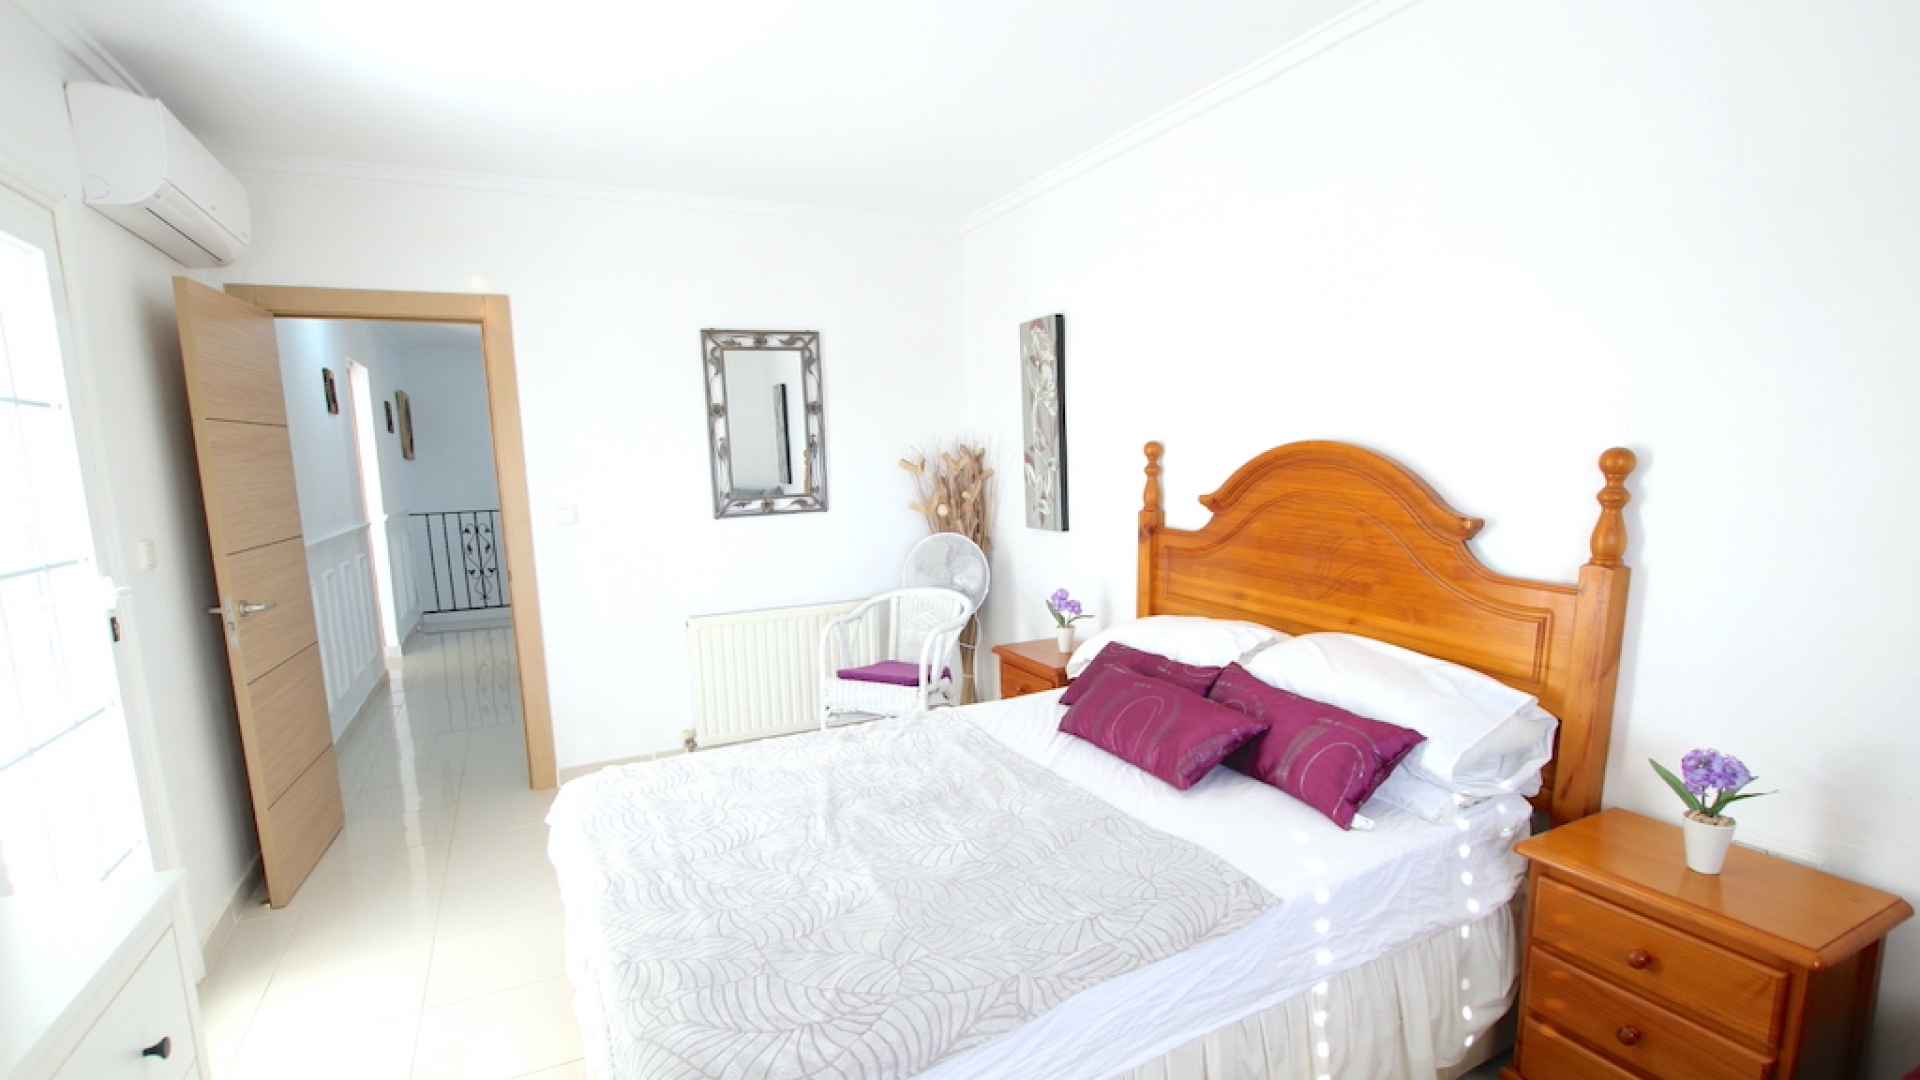 48358_expansive_4_bed_detached_villa_with_private_pool_and_garage_220224130500_img_7528